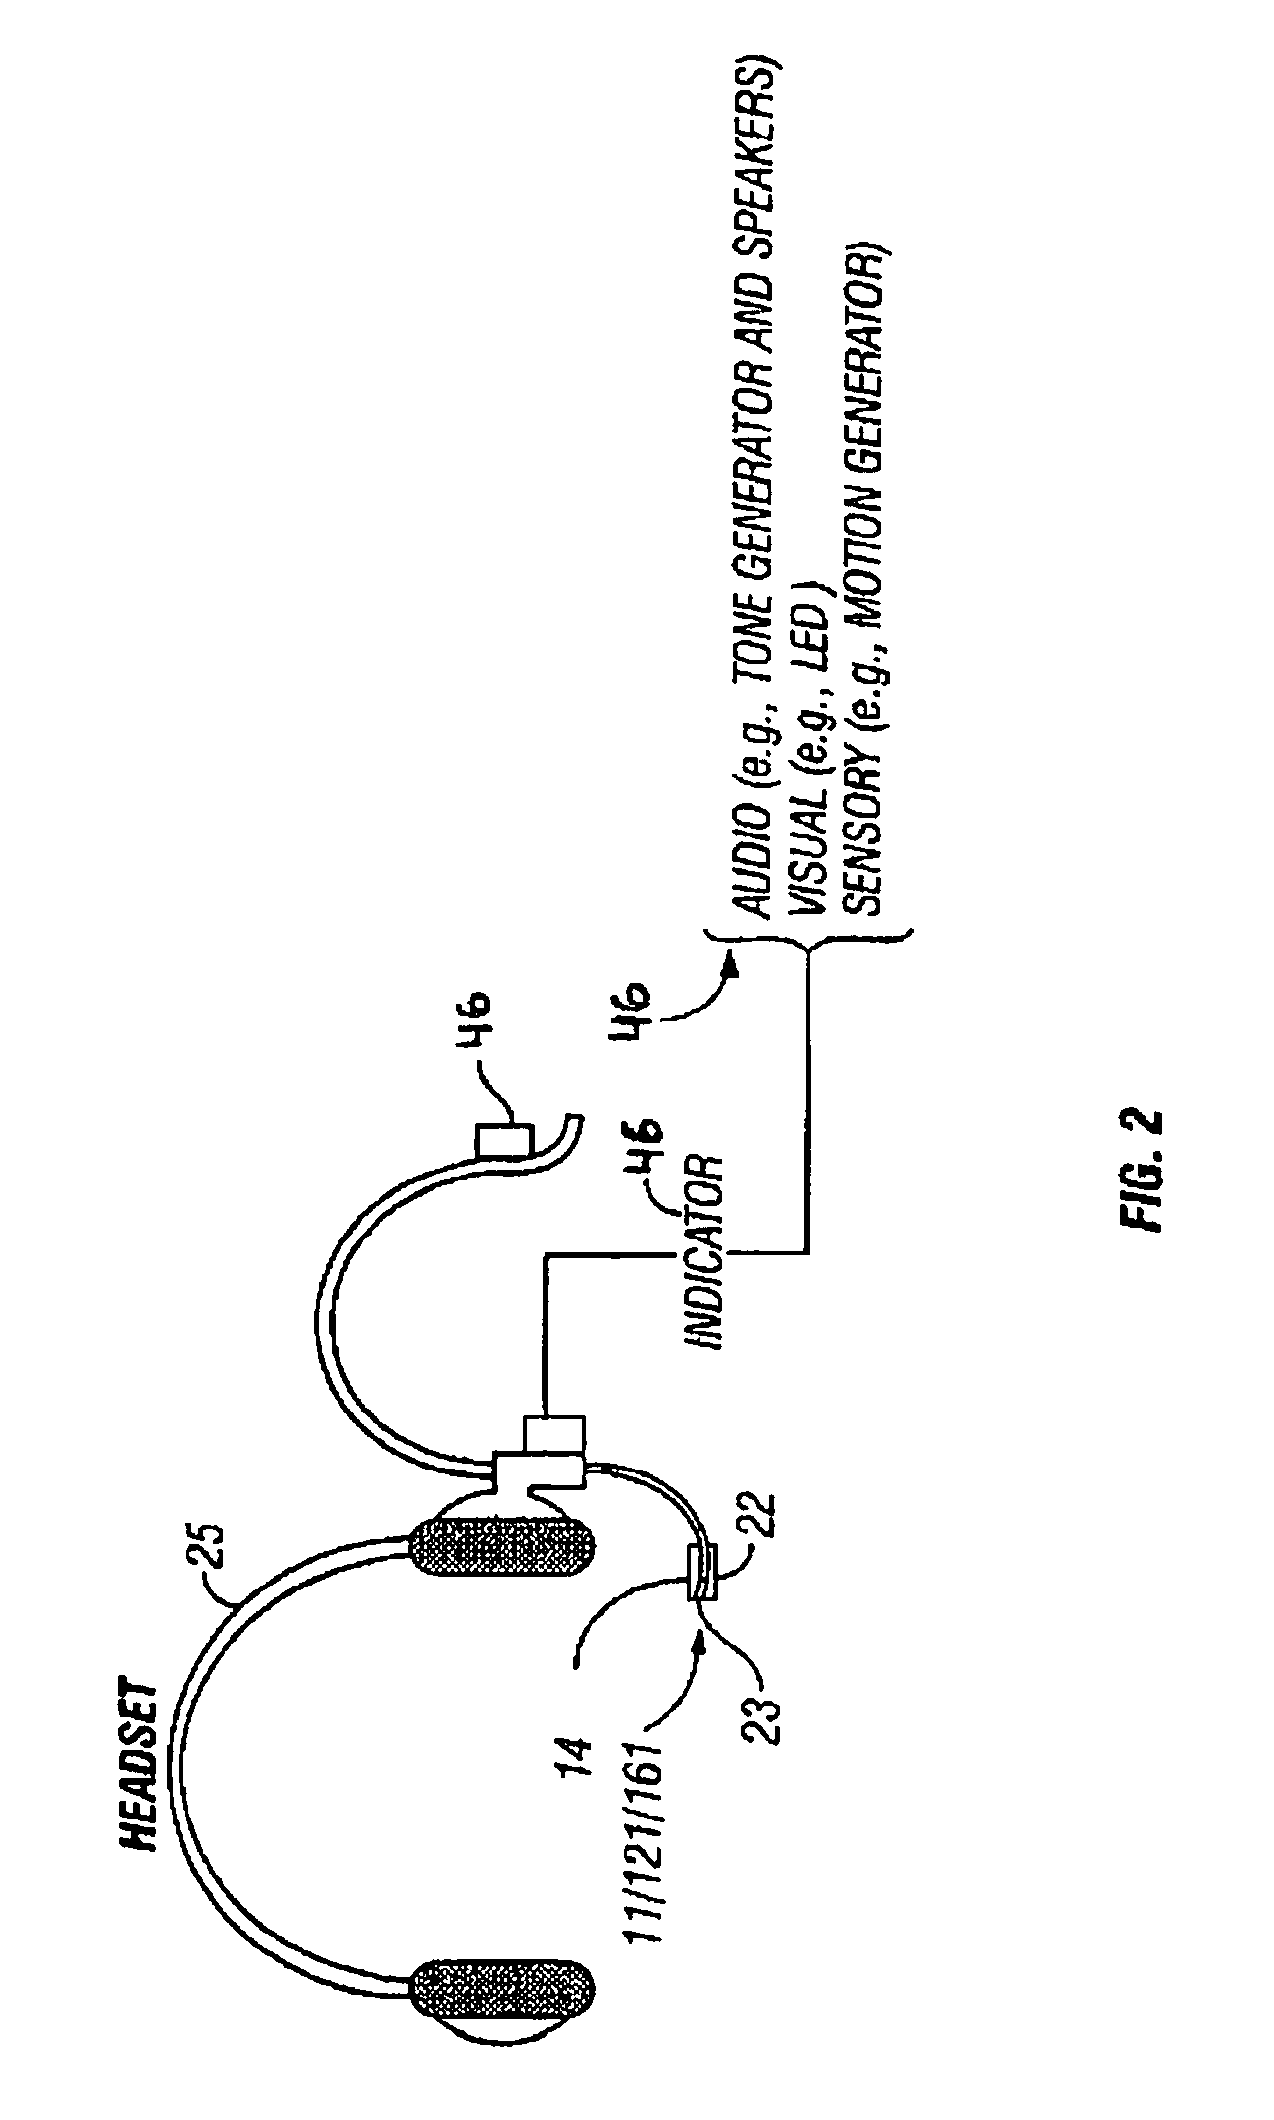 Auto-adjust noise canceling microphone with position sensor